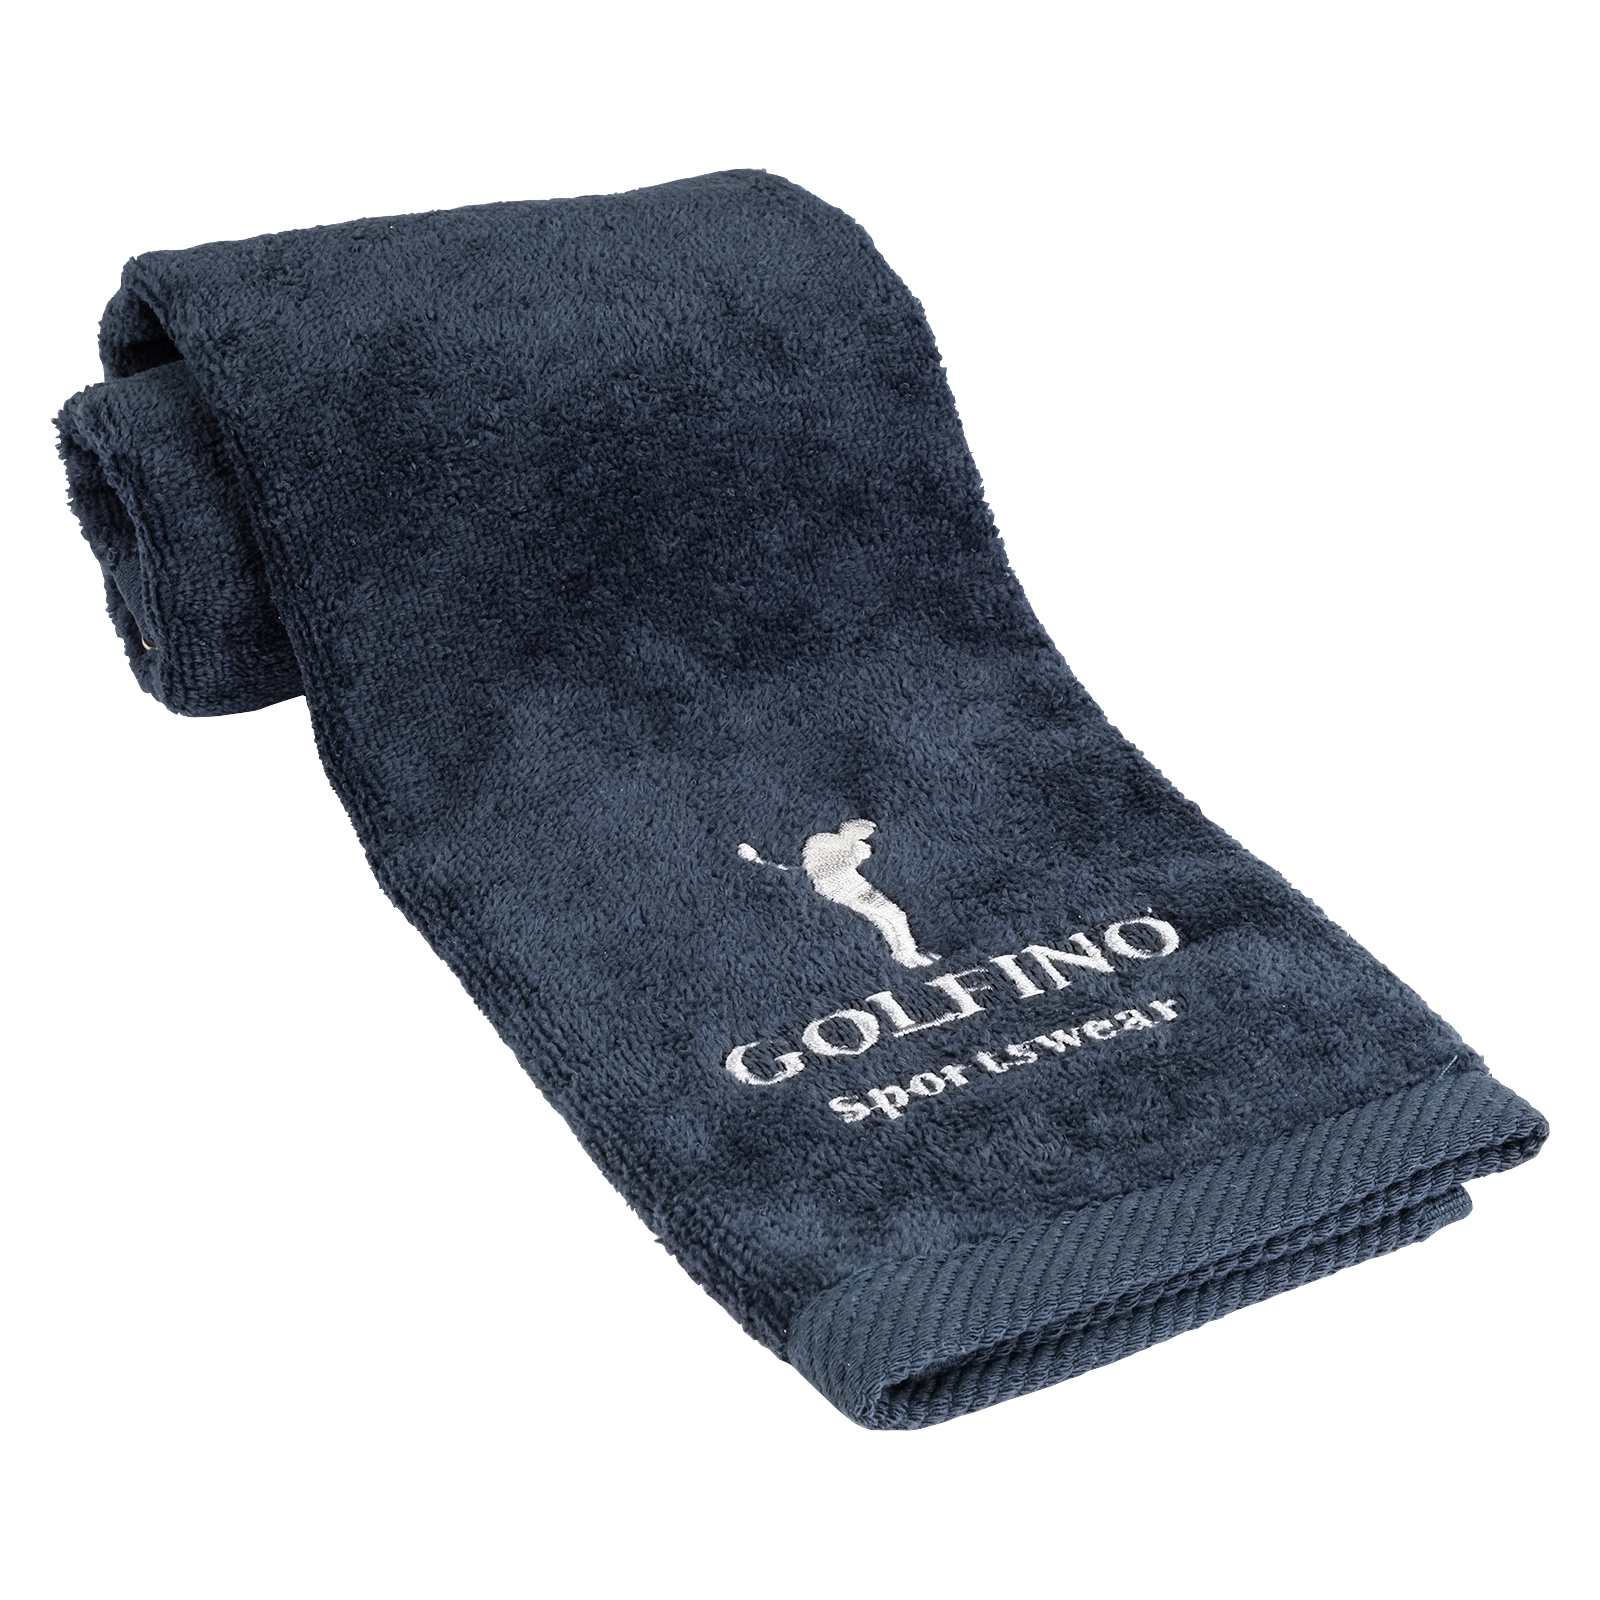 Absorbent golf towel for clubs and equipment